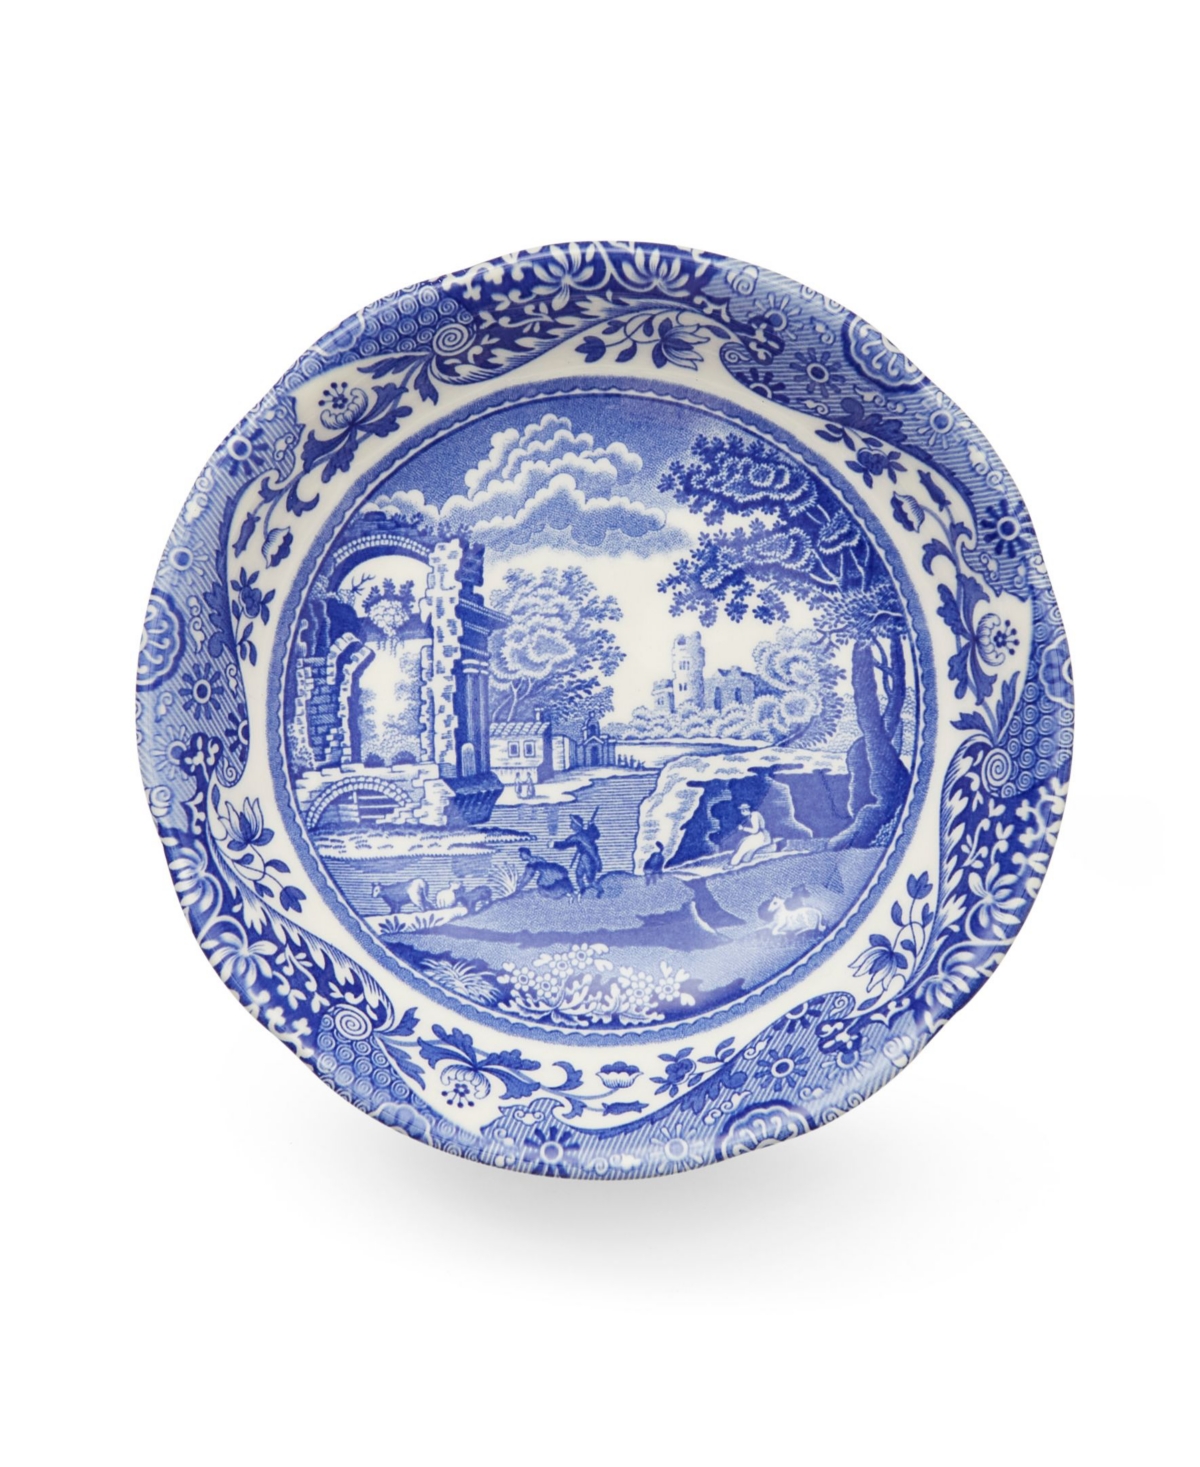 Spode Italian 6.5" Cereal Bowls, Set Of 4 In Blue